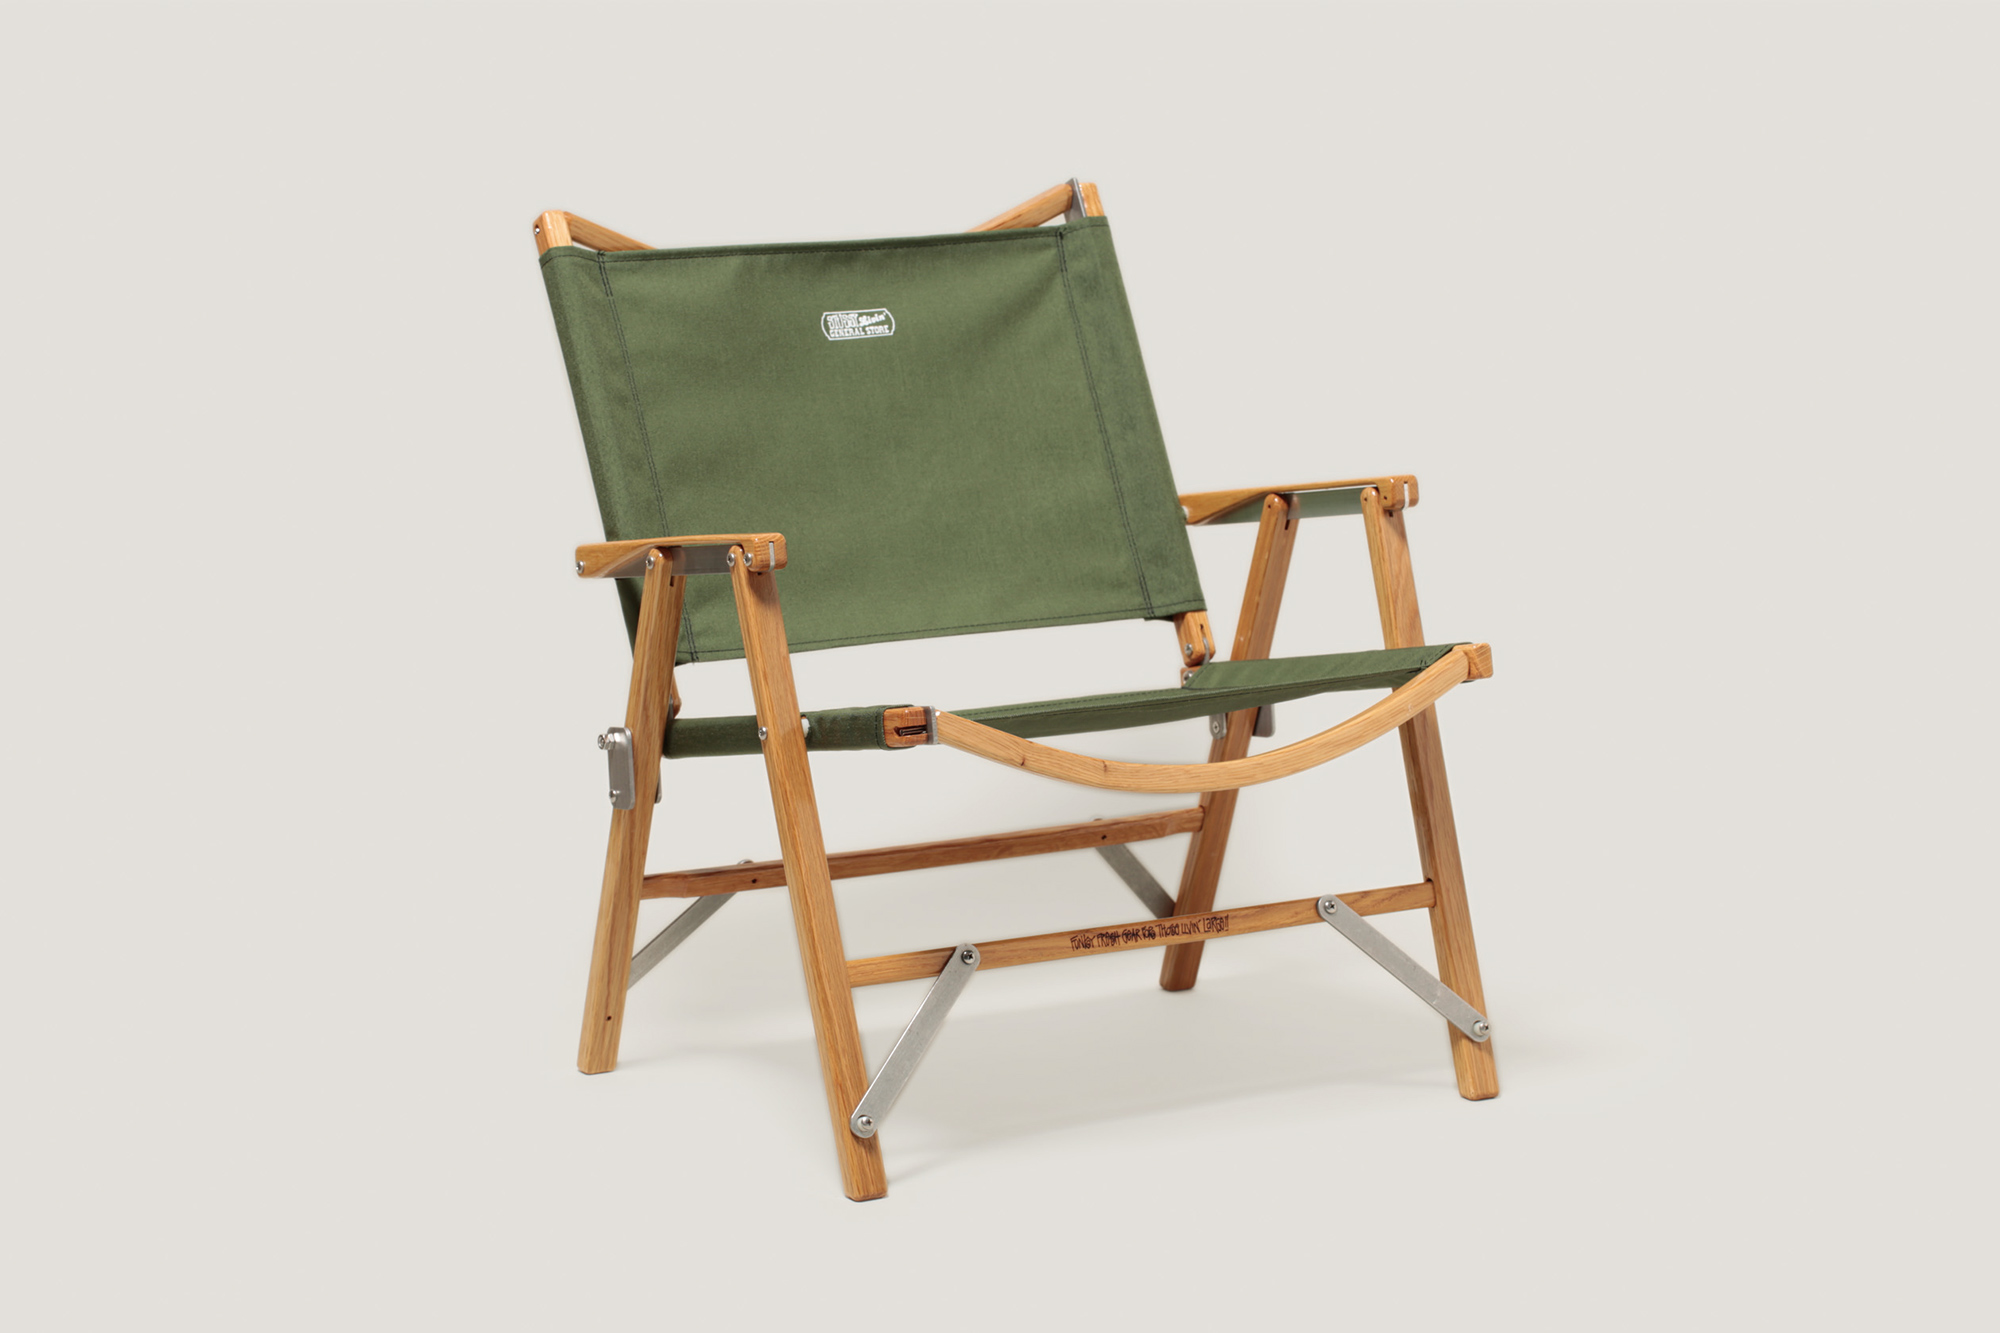 Kermit Chair Company Collapsible Camp Chair | Field Mag